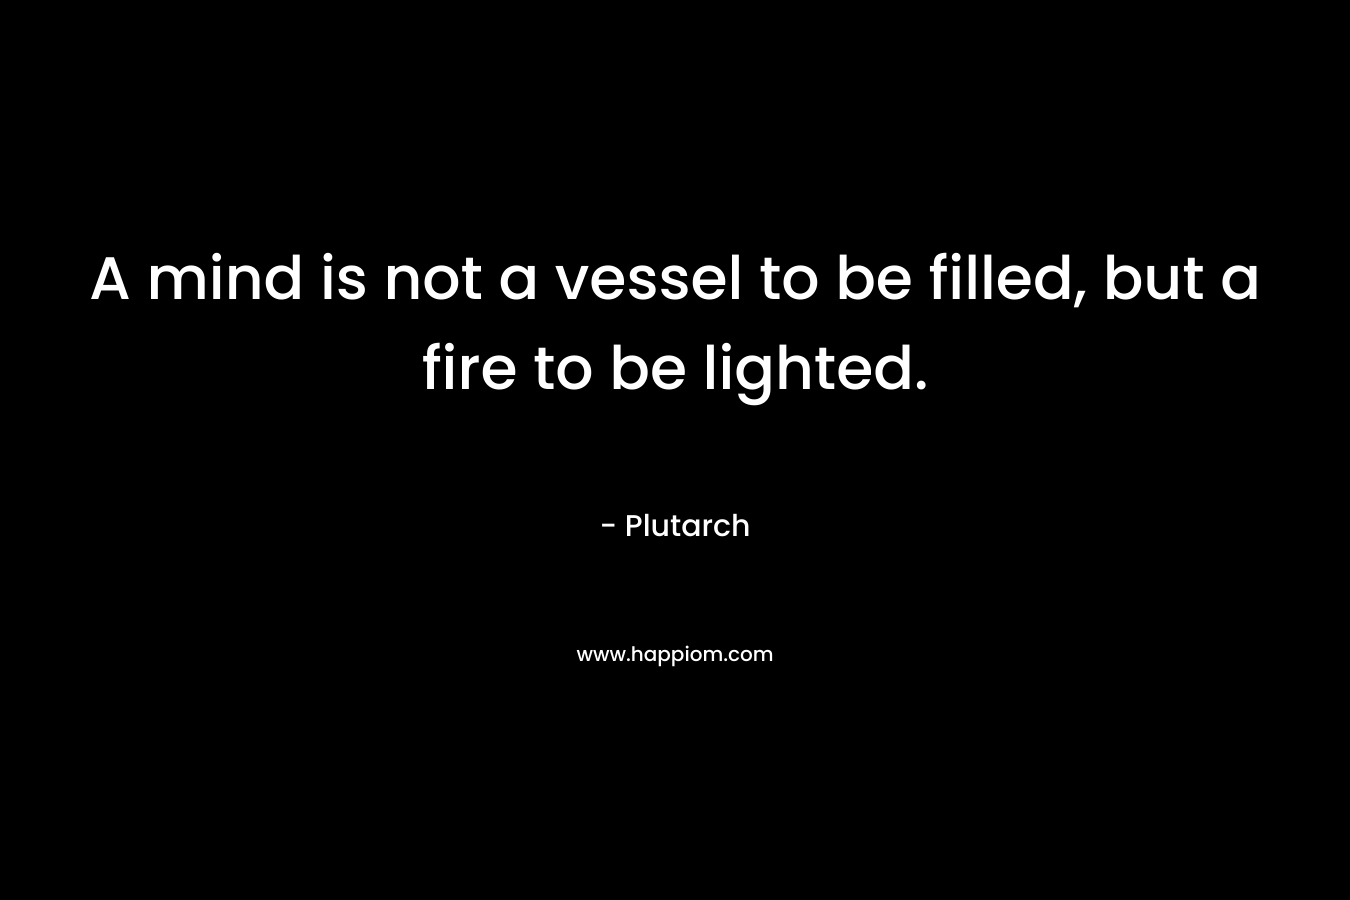 A mind is not a vessel to be filled, but a fire to be lighted.